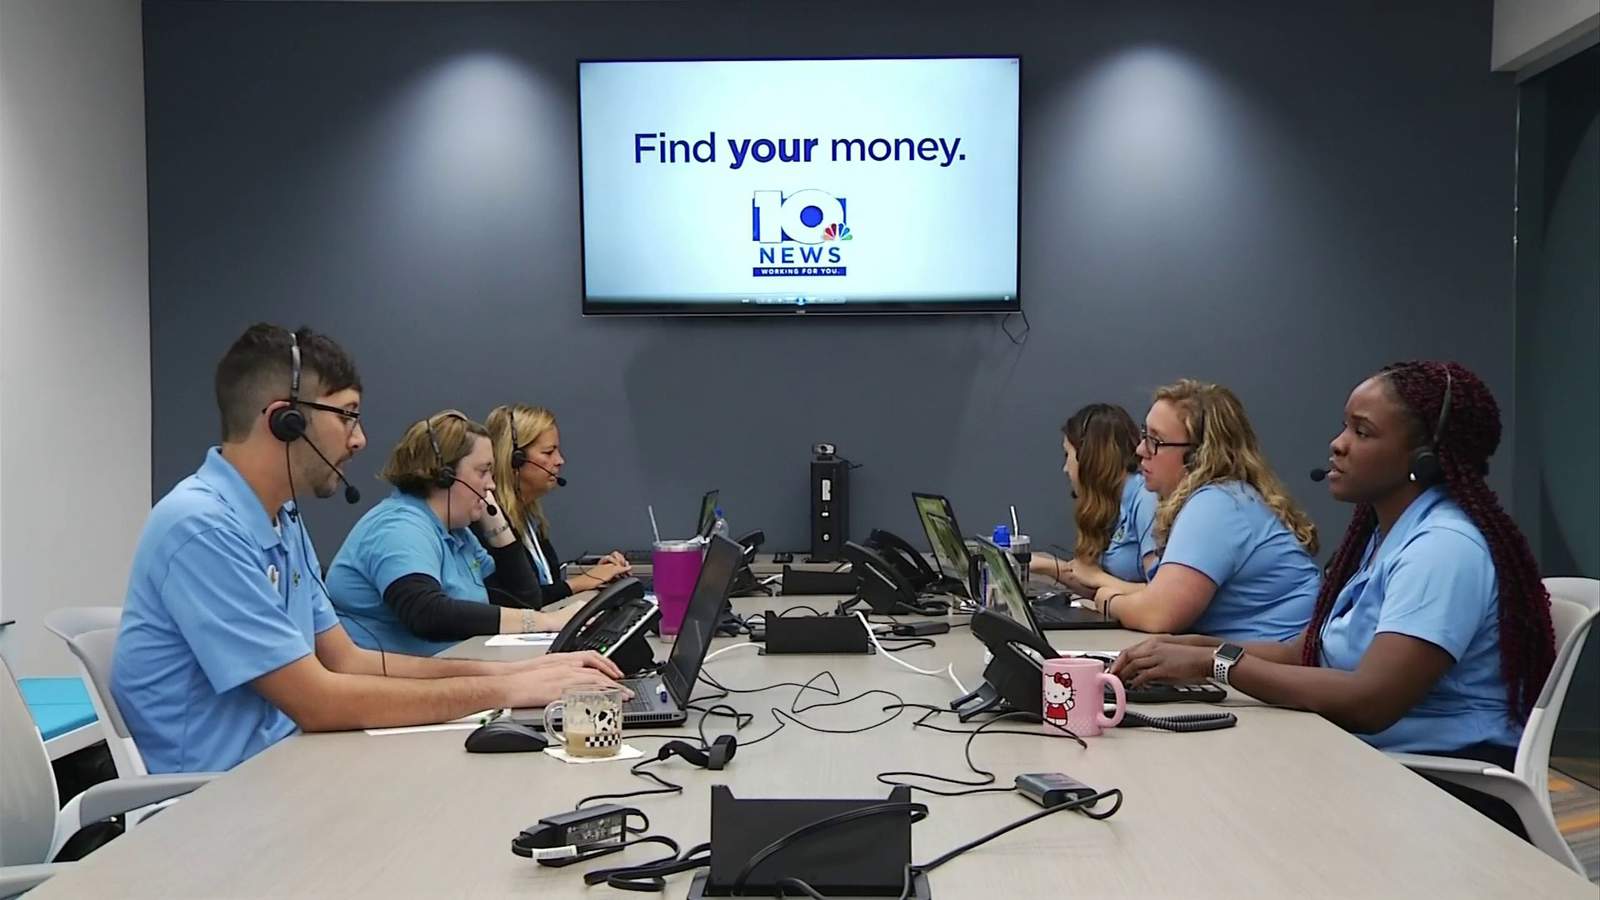 10 News found viewers $73,000 during ‘Find Your Money’ event